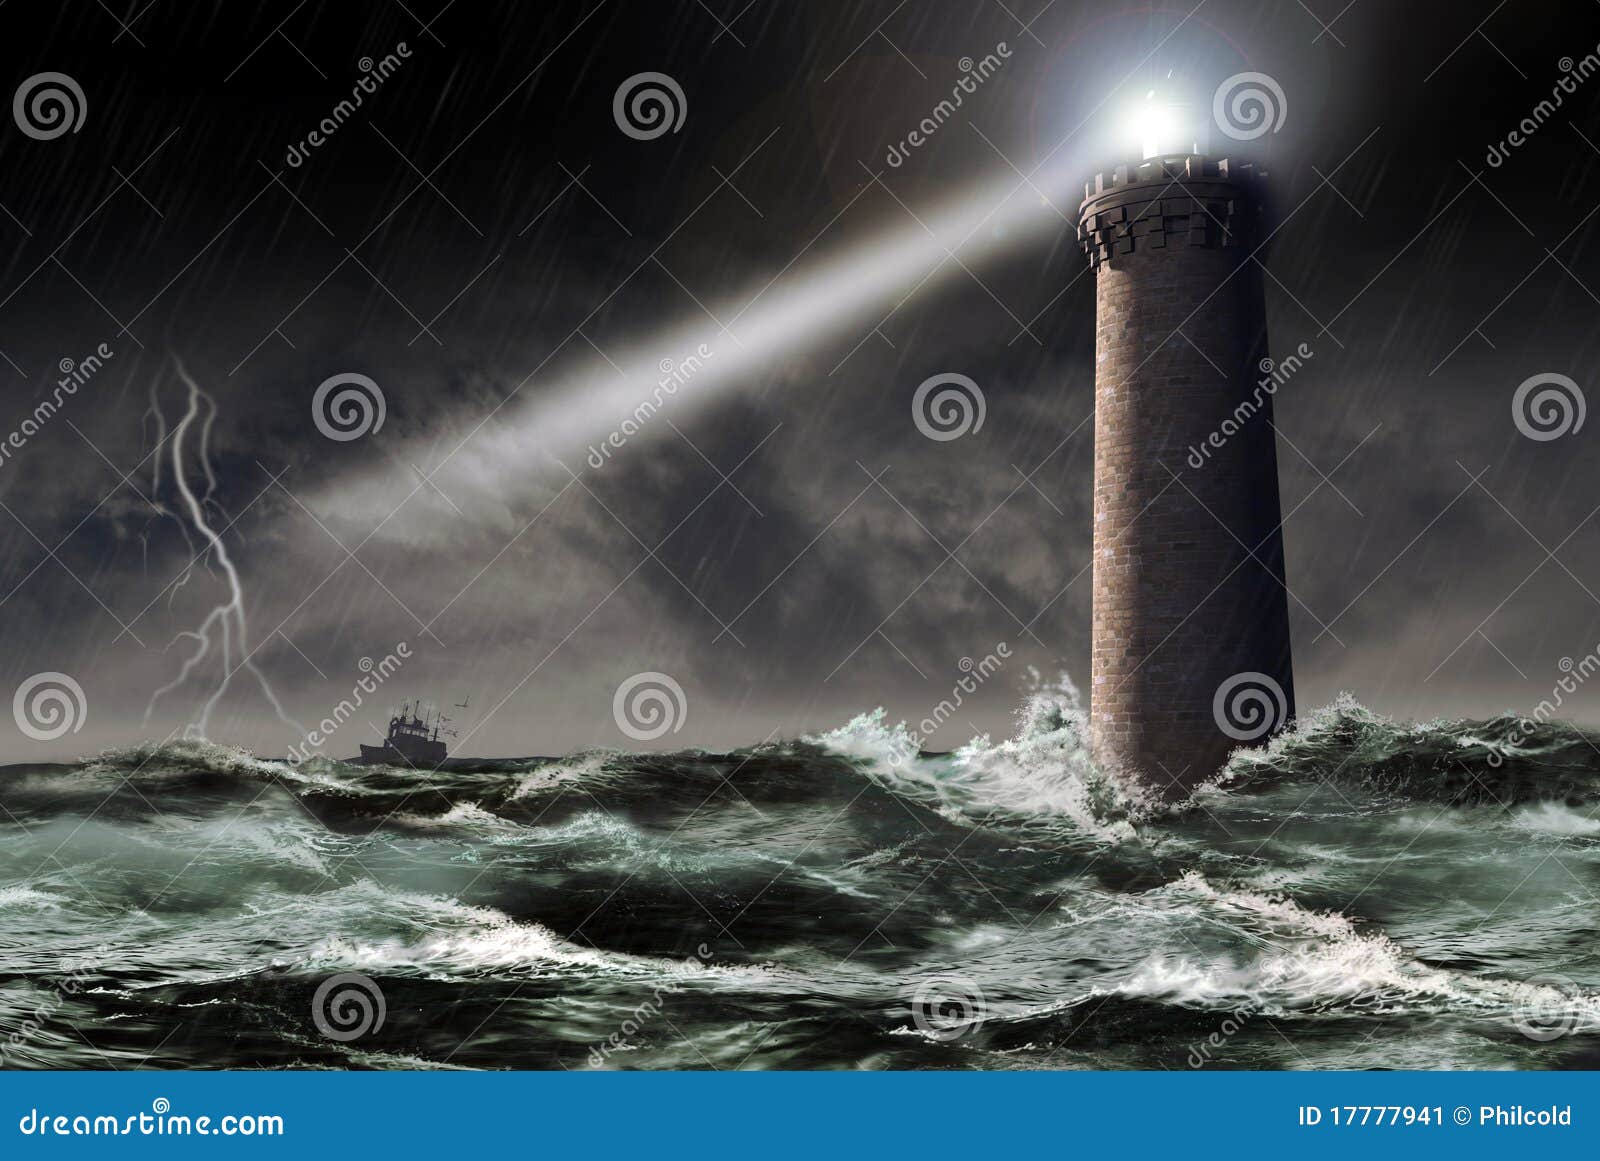 lighthouse under the storm